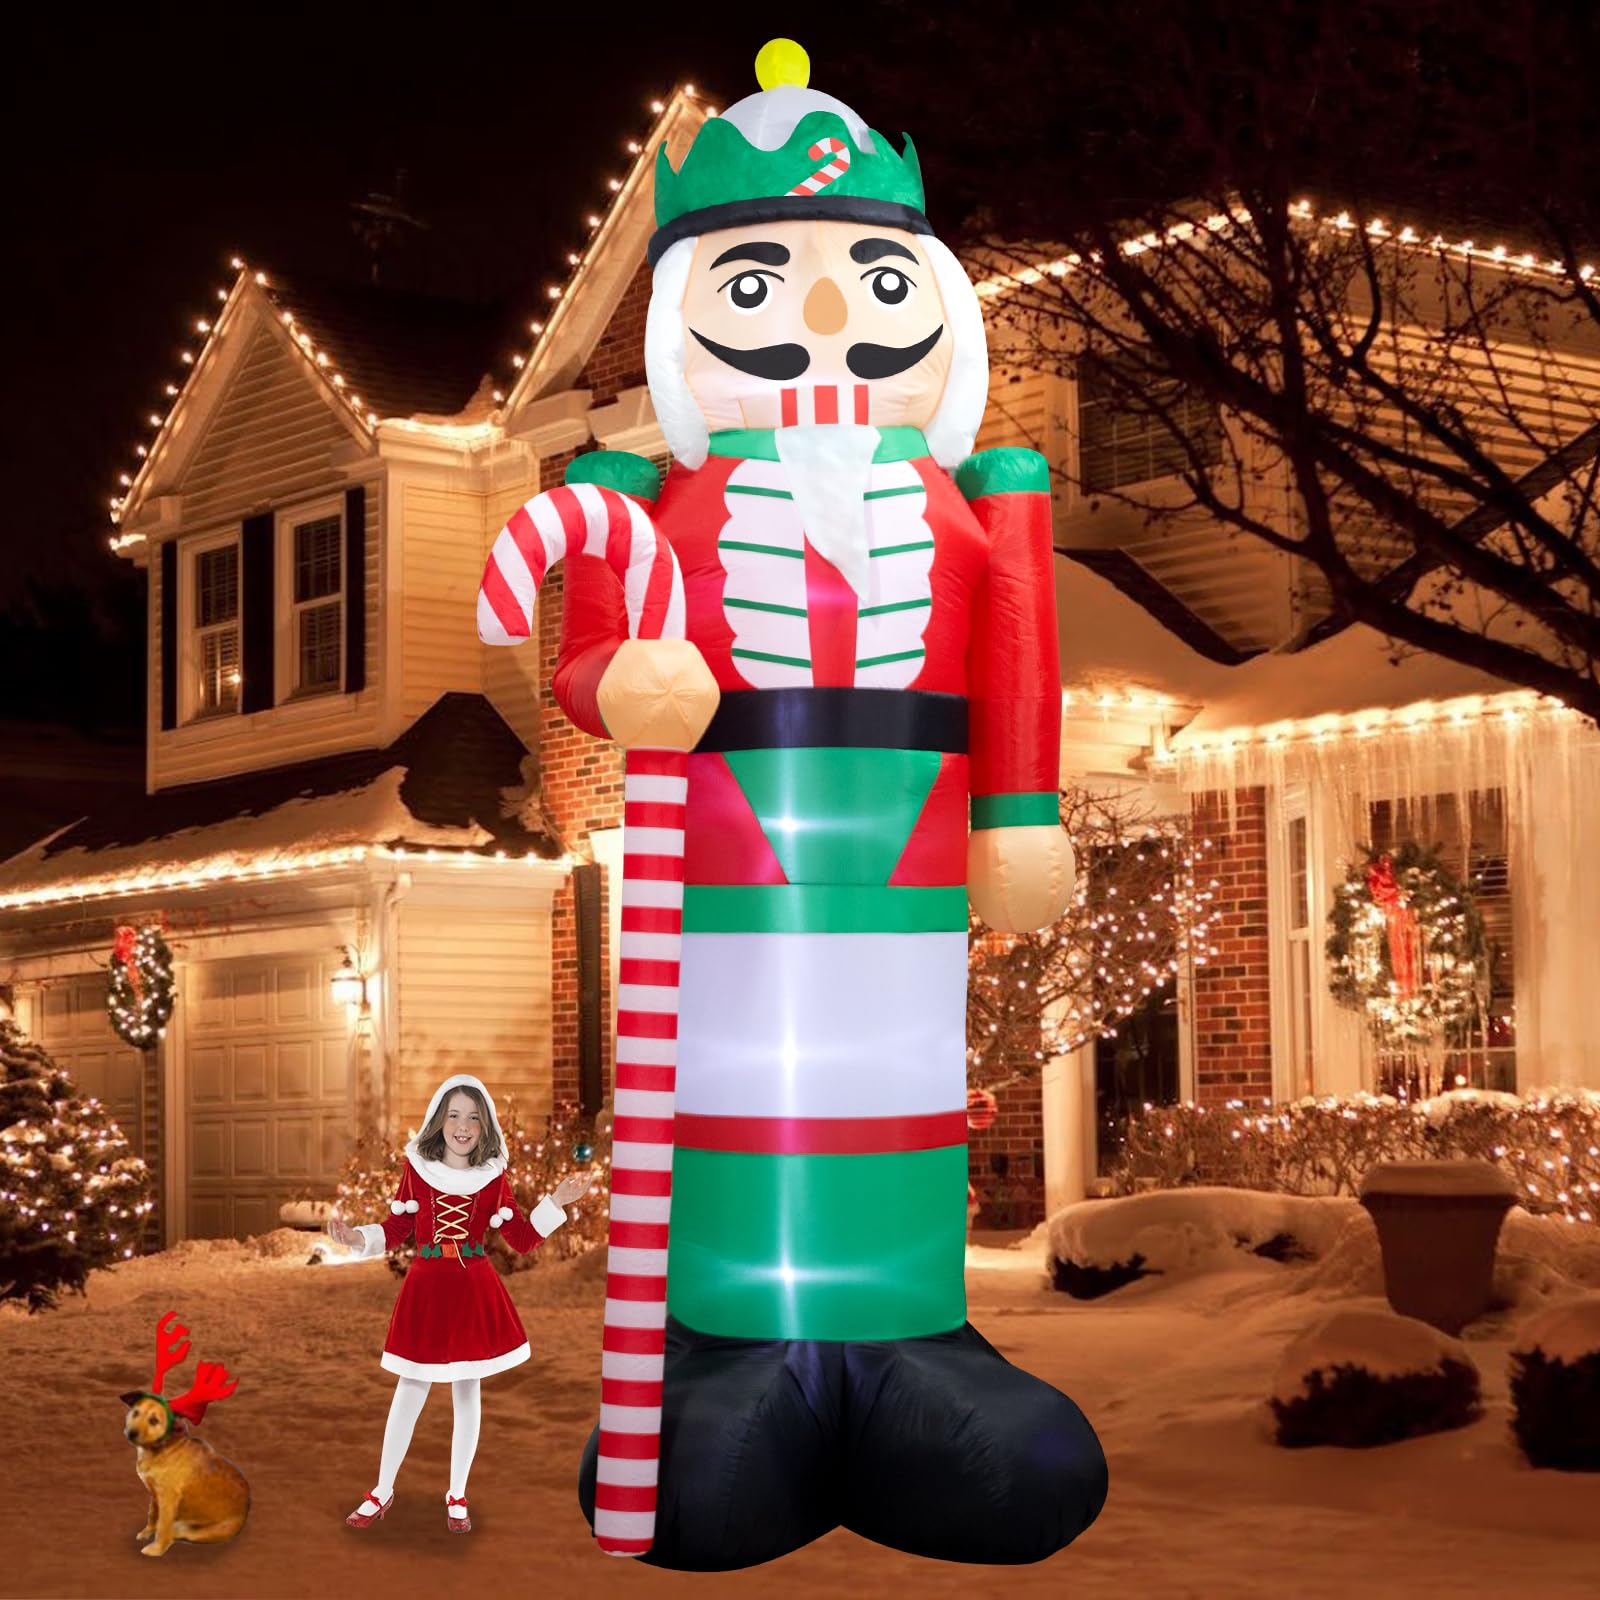 Amazon.com: 14FT Height Giant Christmas Inflatables Decorations ...